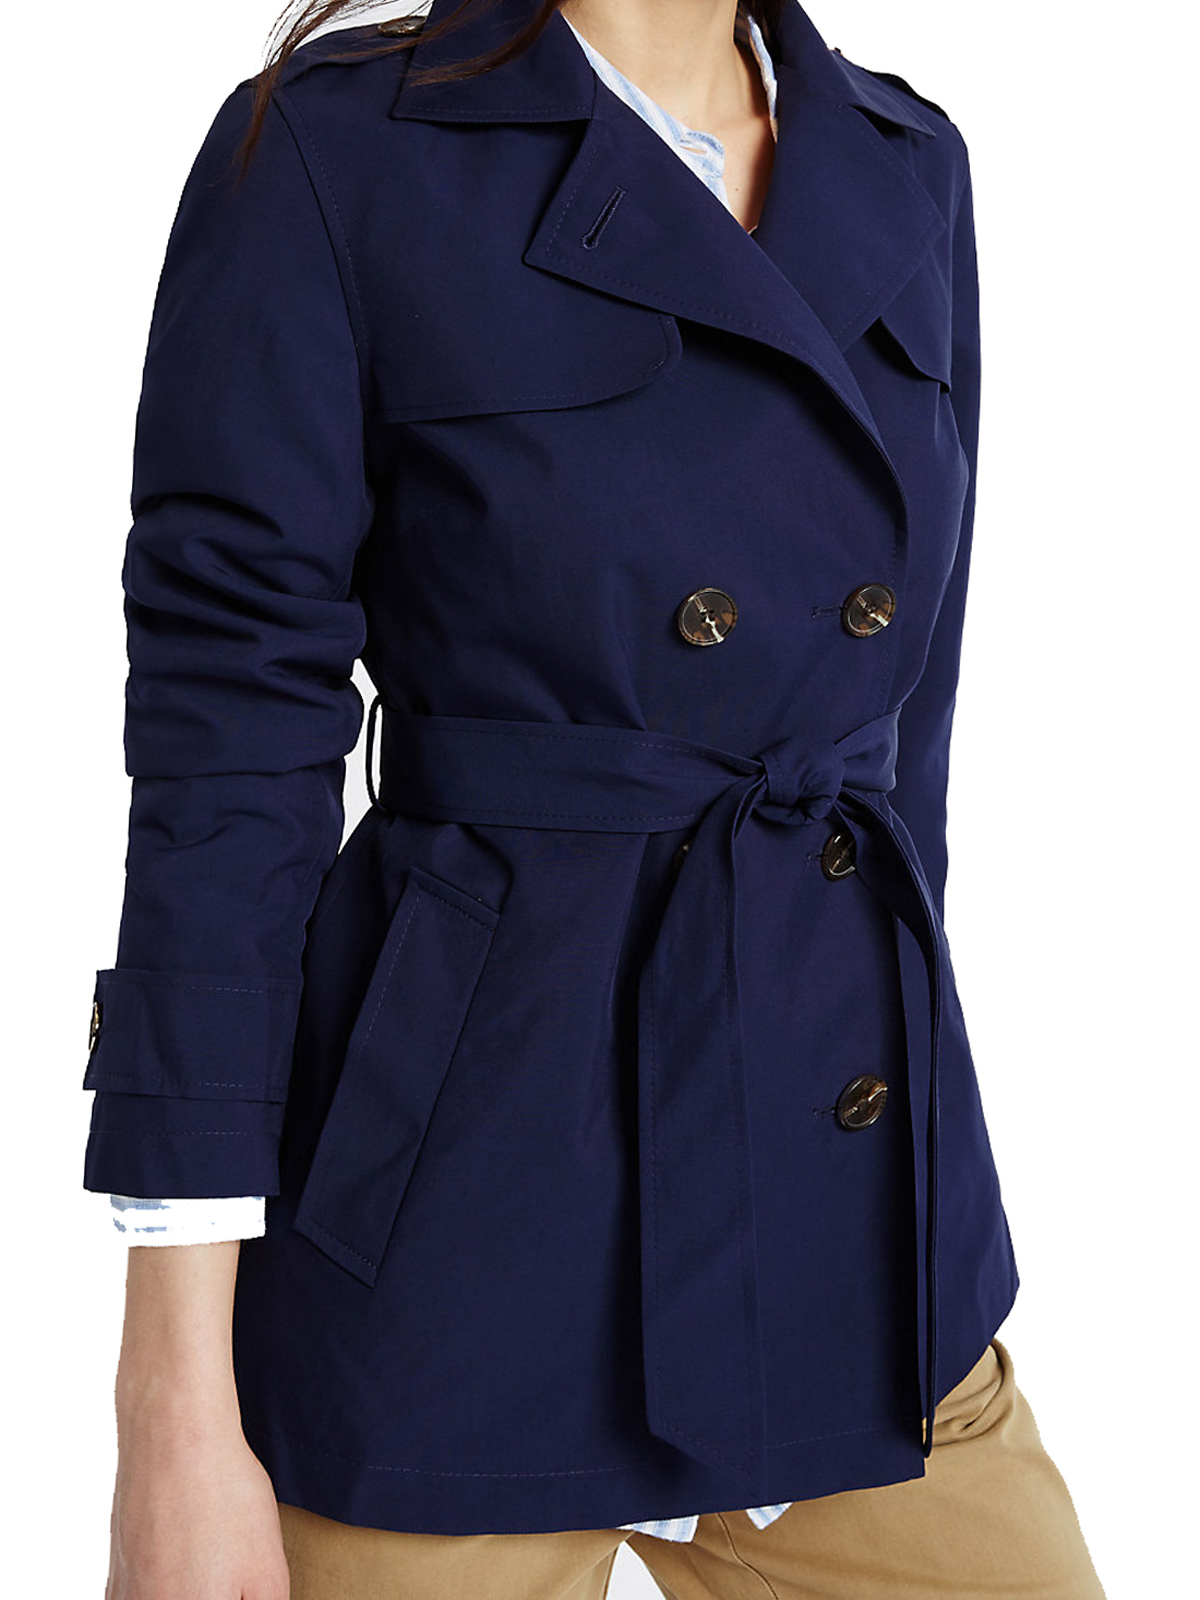 Marks and Spencer - - M&5 NAVY Belted Trench Coat with Stormwear - Size ...